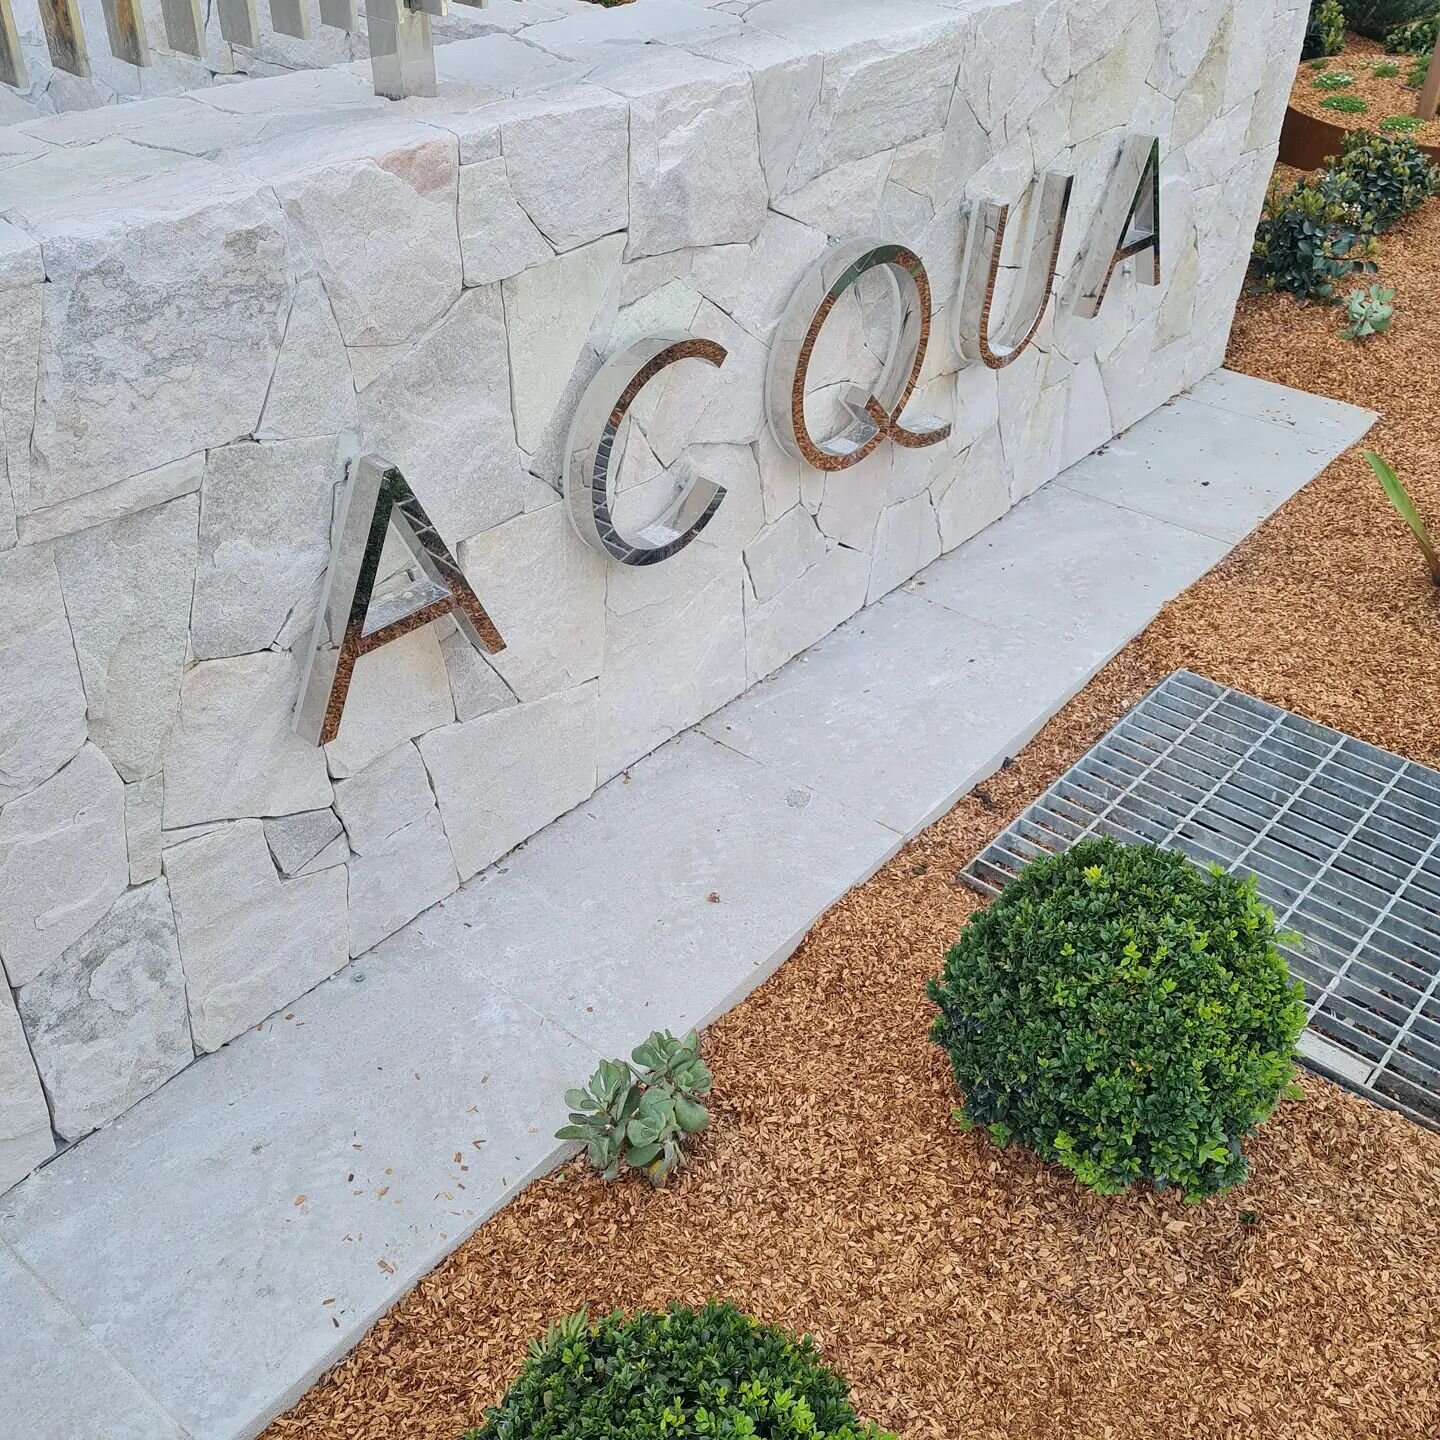 Fantastic development 5 star quality at #cronullabeach polished stainless back lit. All statutory signage polished stainless engraved looks sharp #aquacronulla #signageaustralia